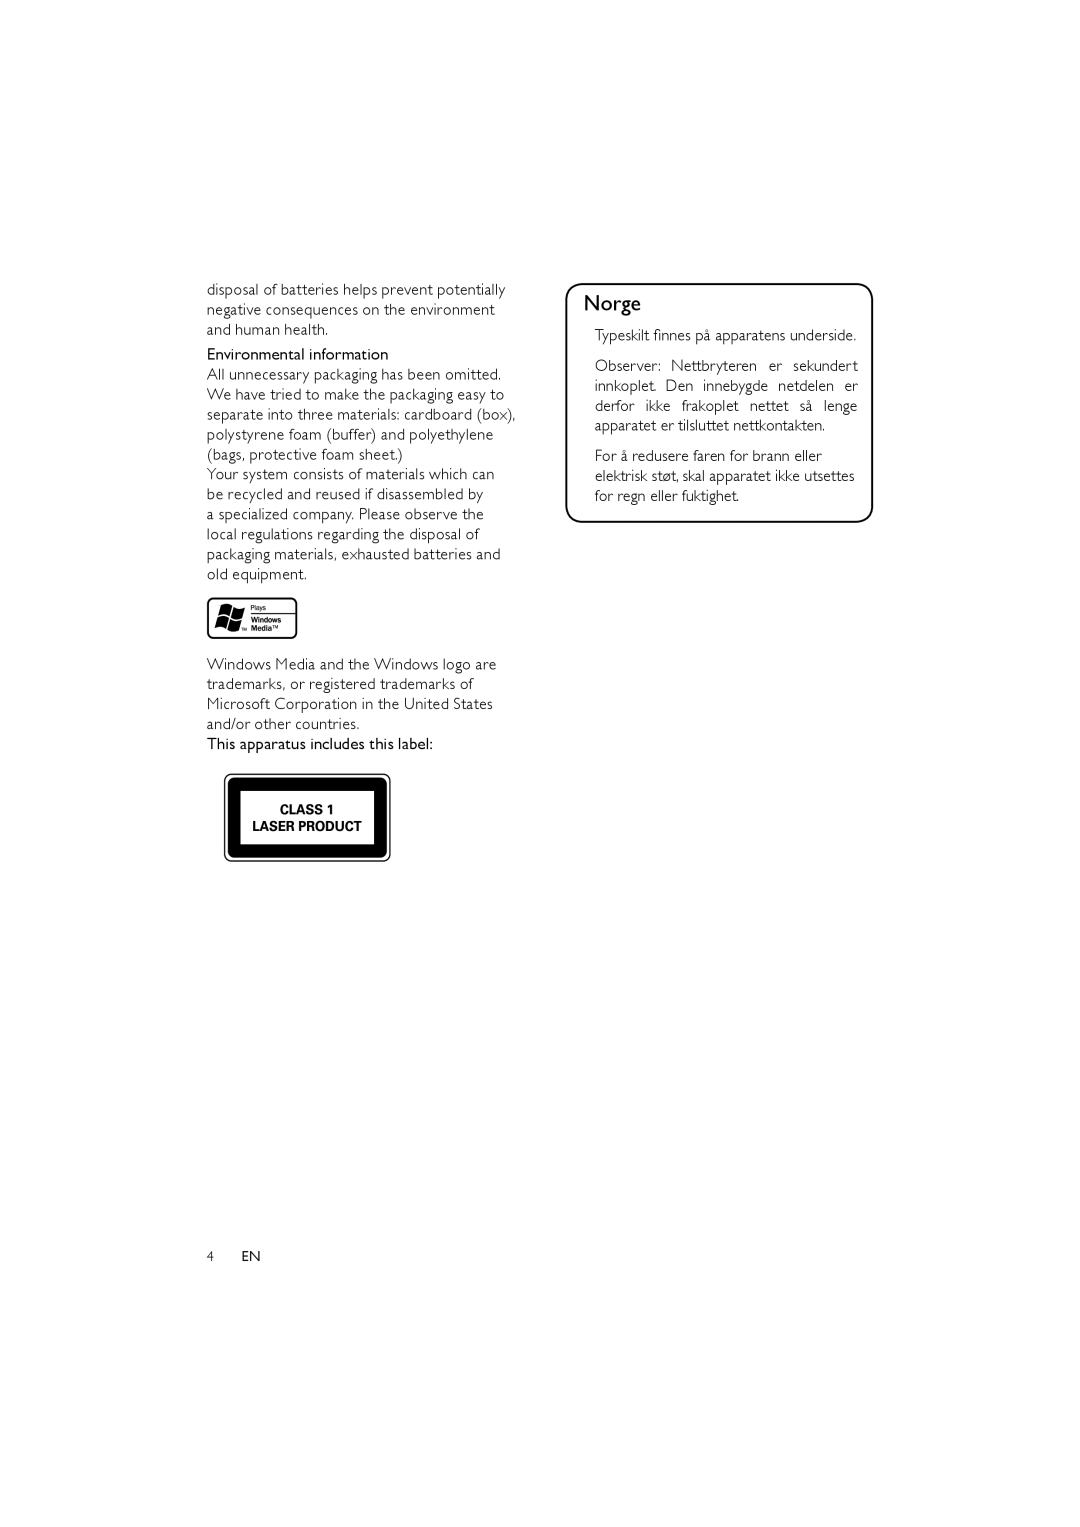 Philips FWM387/12 user manual Norge, Environmental information, This apparatus includes this label, 4 EN 